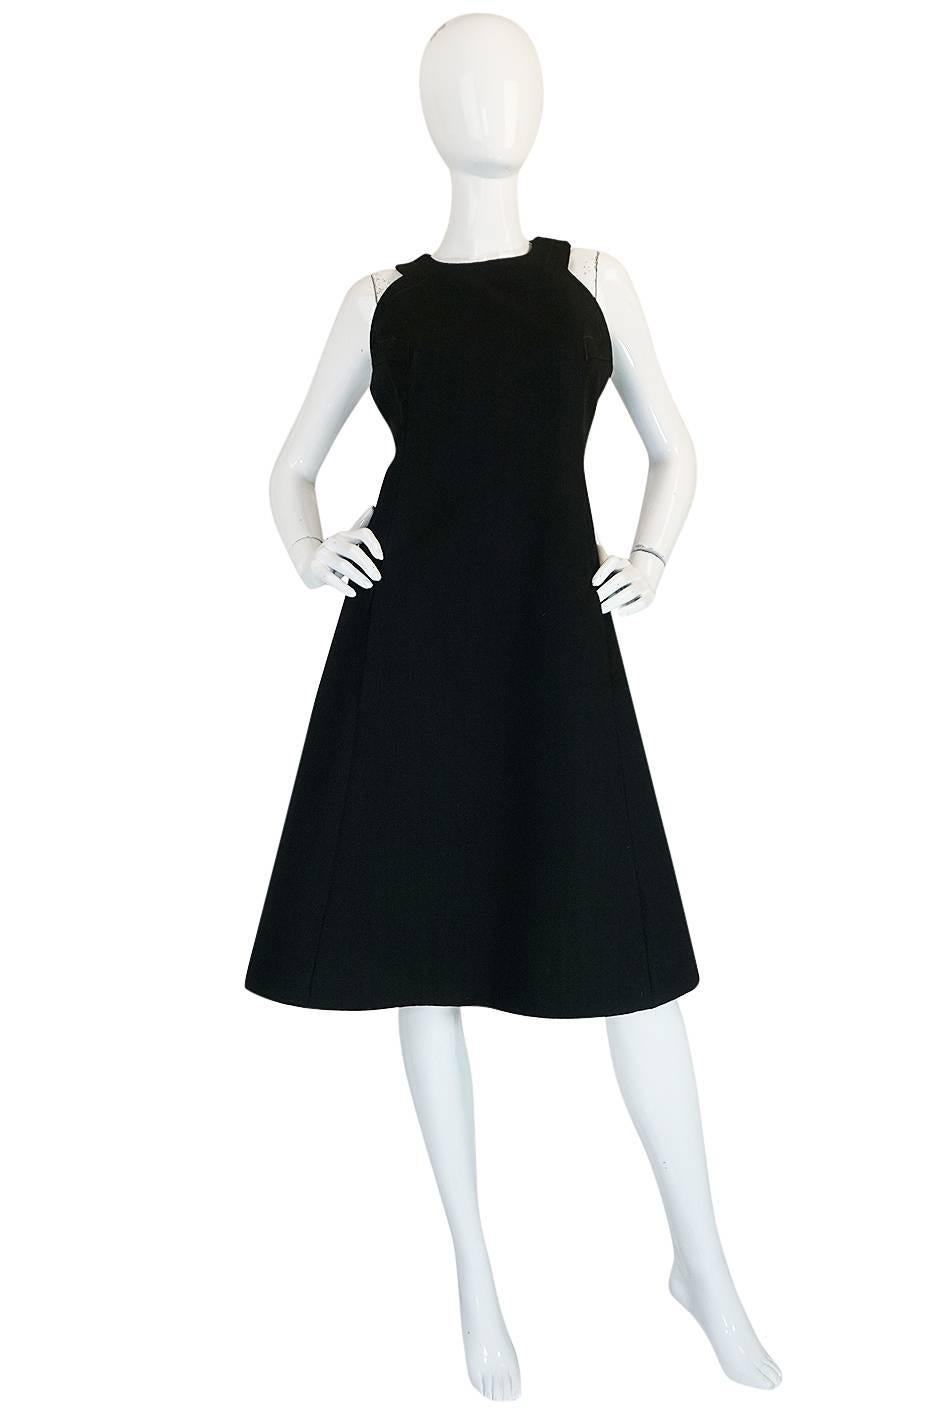 This wonderful dress and graphic jacket set is a testament to the greatness of James Galanos who just recently passed away at the age of 92. Galanos was one of the great American Couturiers and his work stays relevant season after season. This set